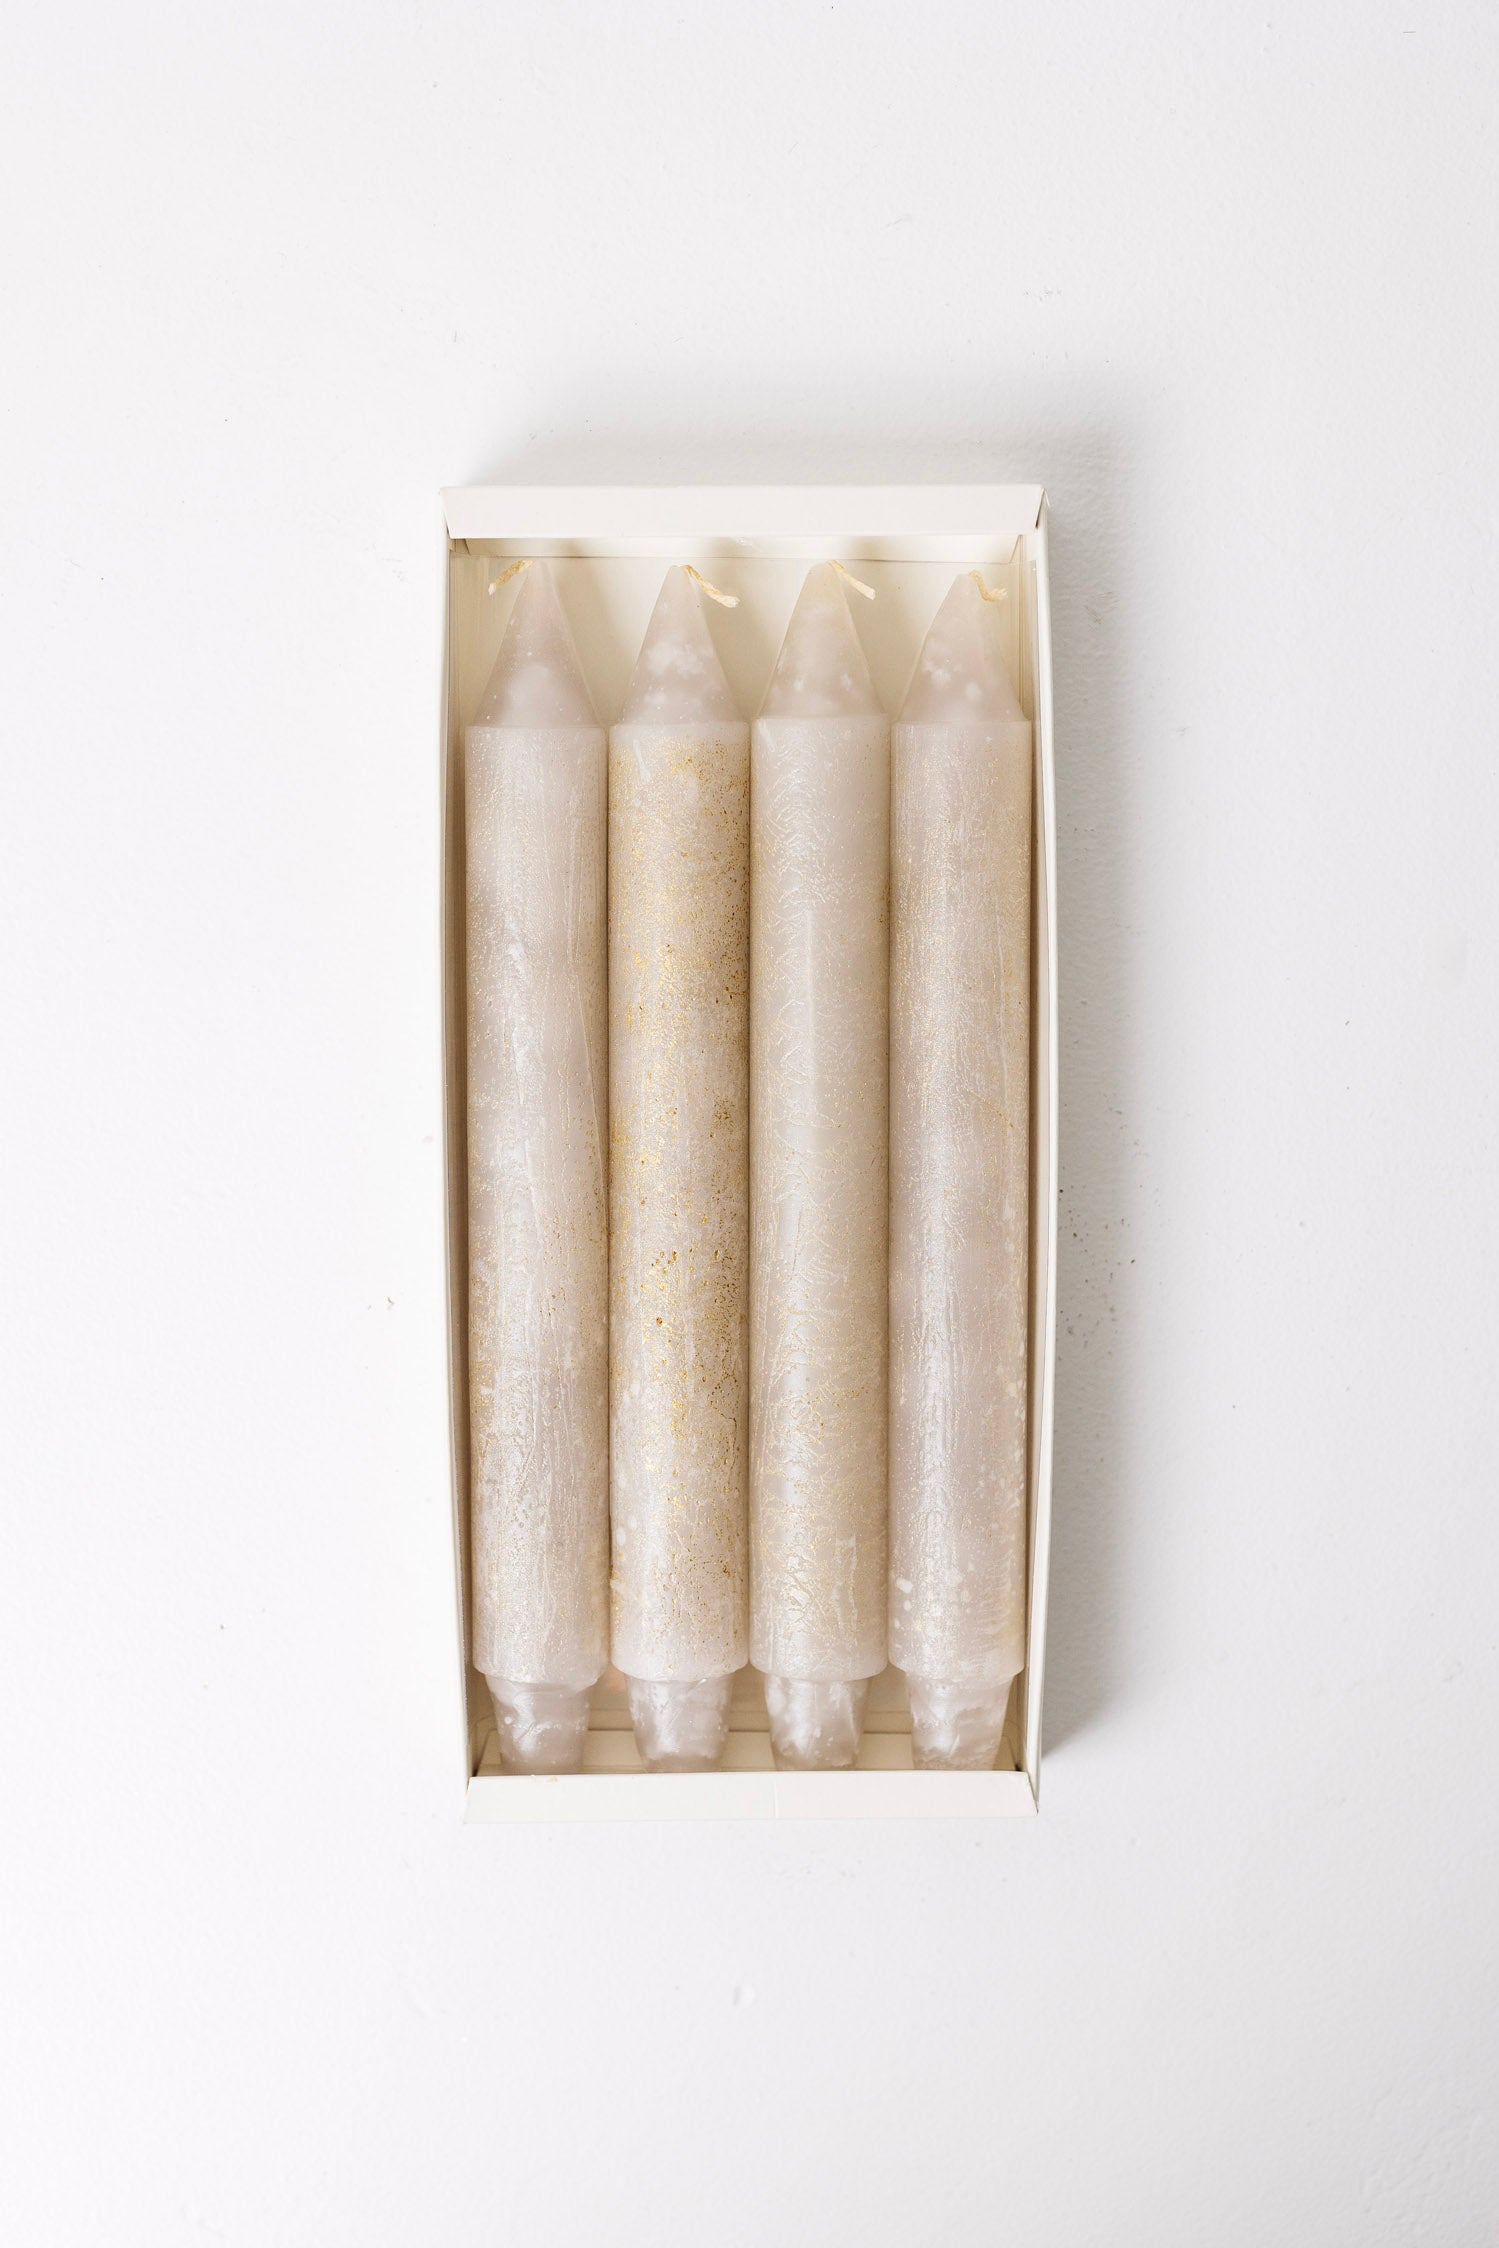 Russet Taper Candles - Set of 4